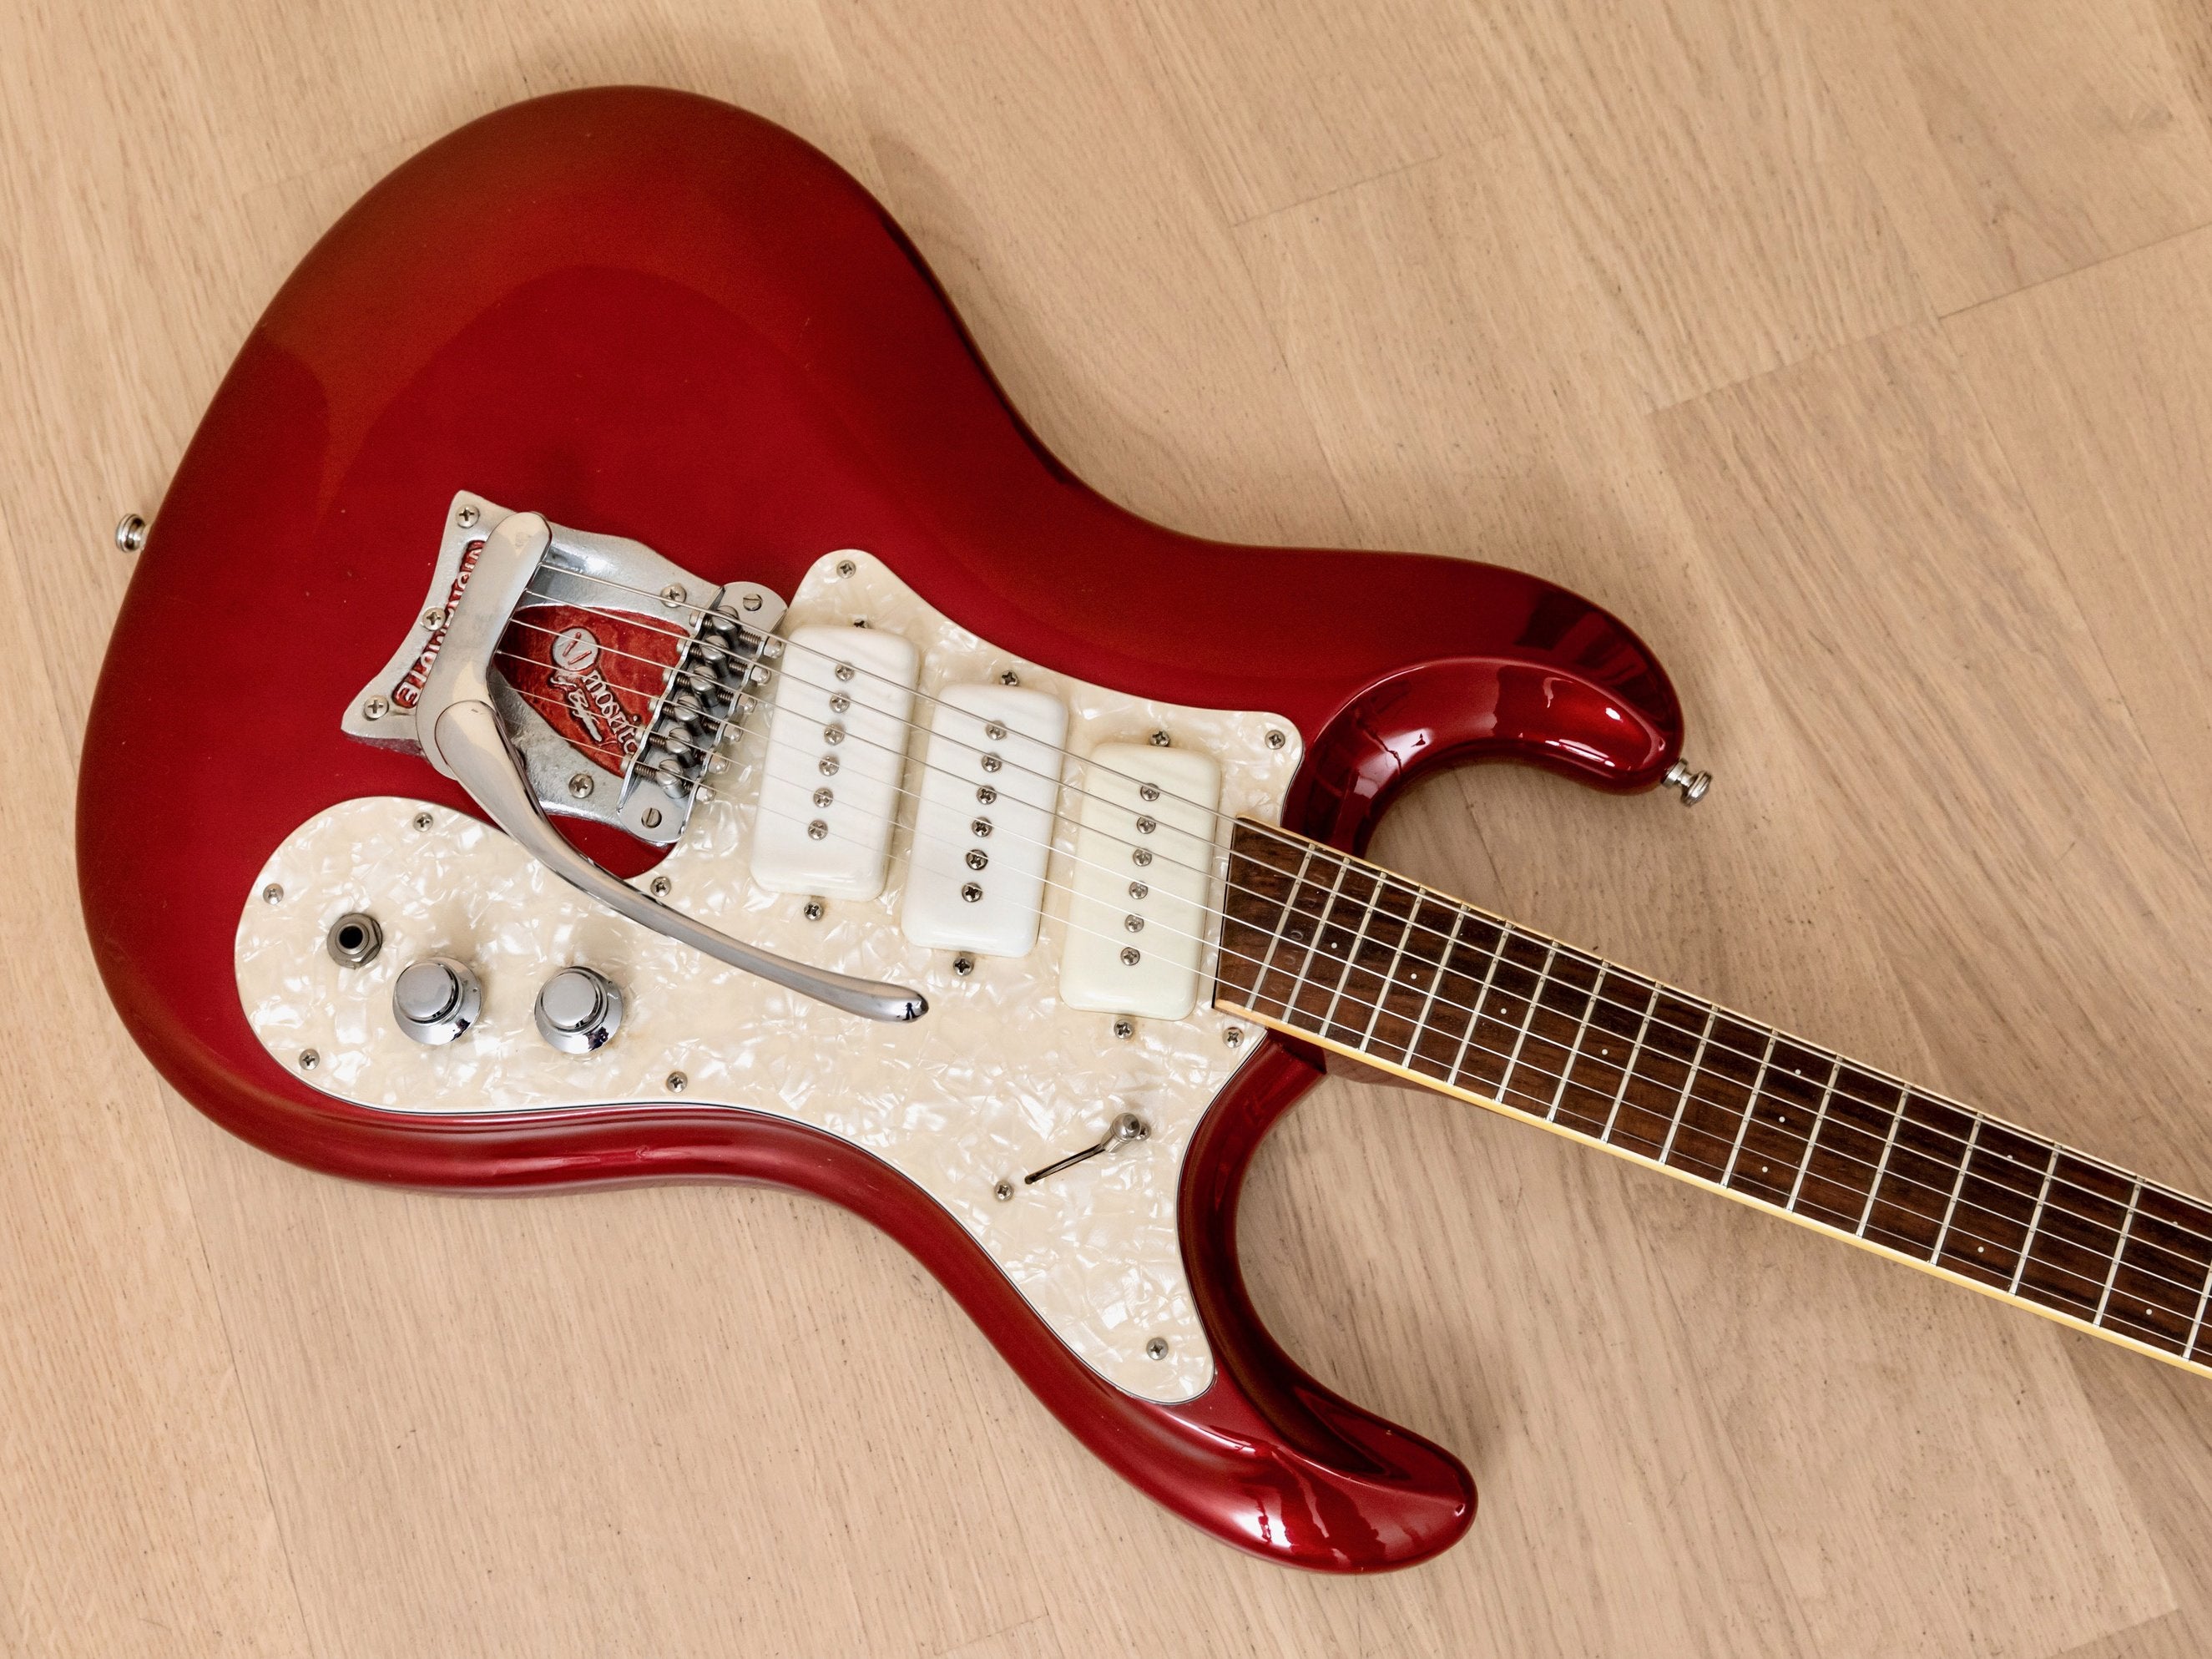 2004 Mosrite Eurorite 3 Pickup Non-Production Ventures-Style Guitar, Candy Apple Red w/ Case, Fillmore